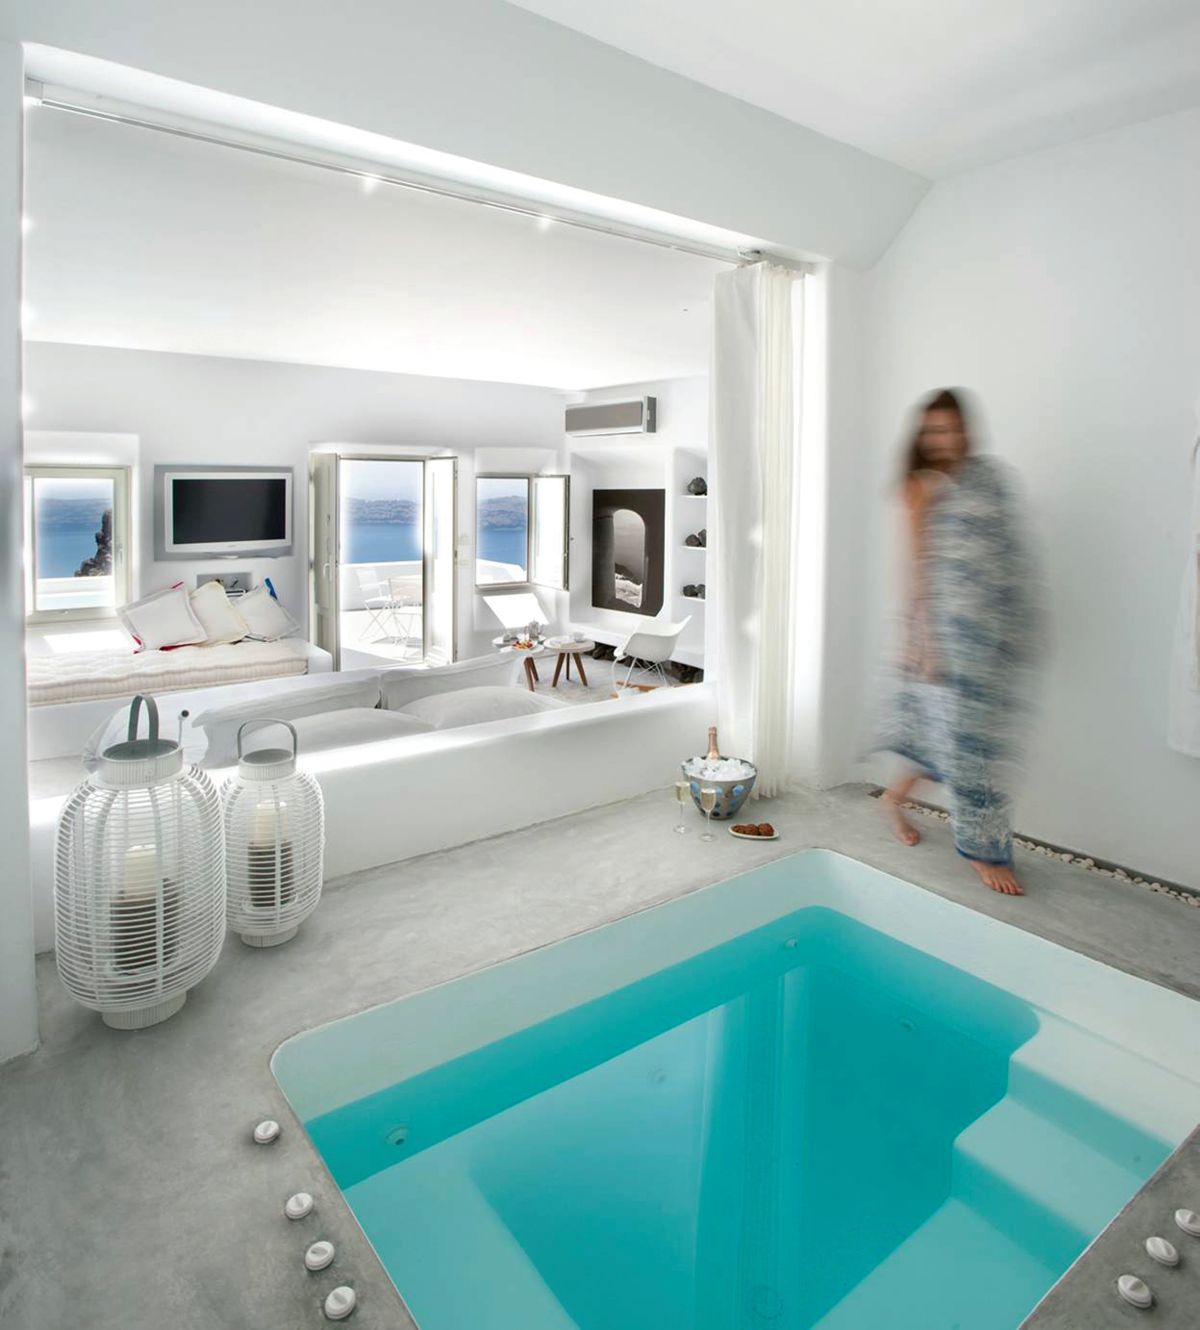 Hotel Rooms with Pools Inside